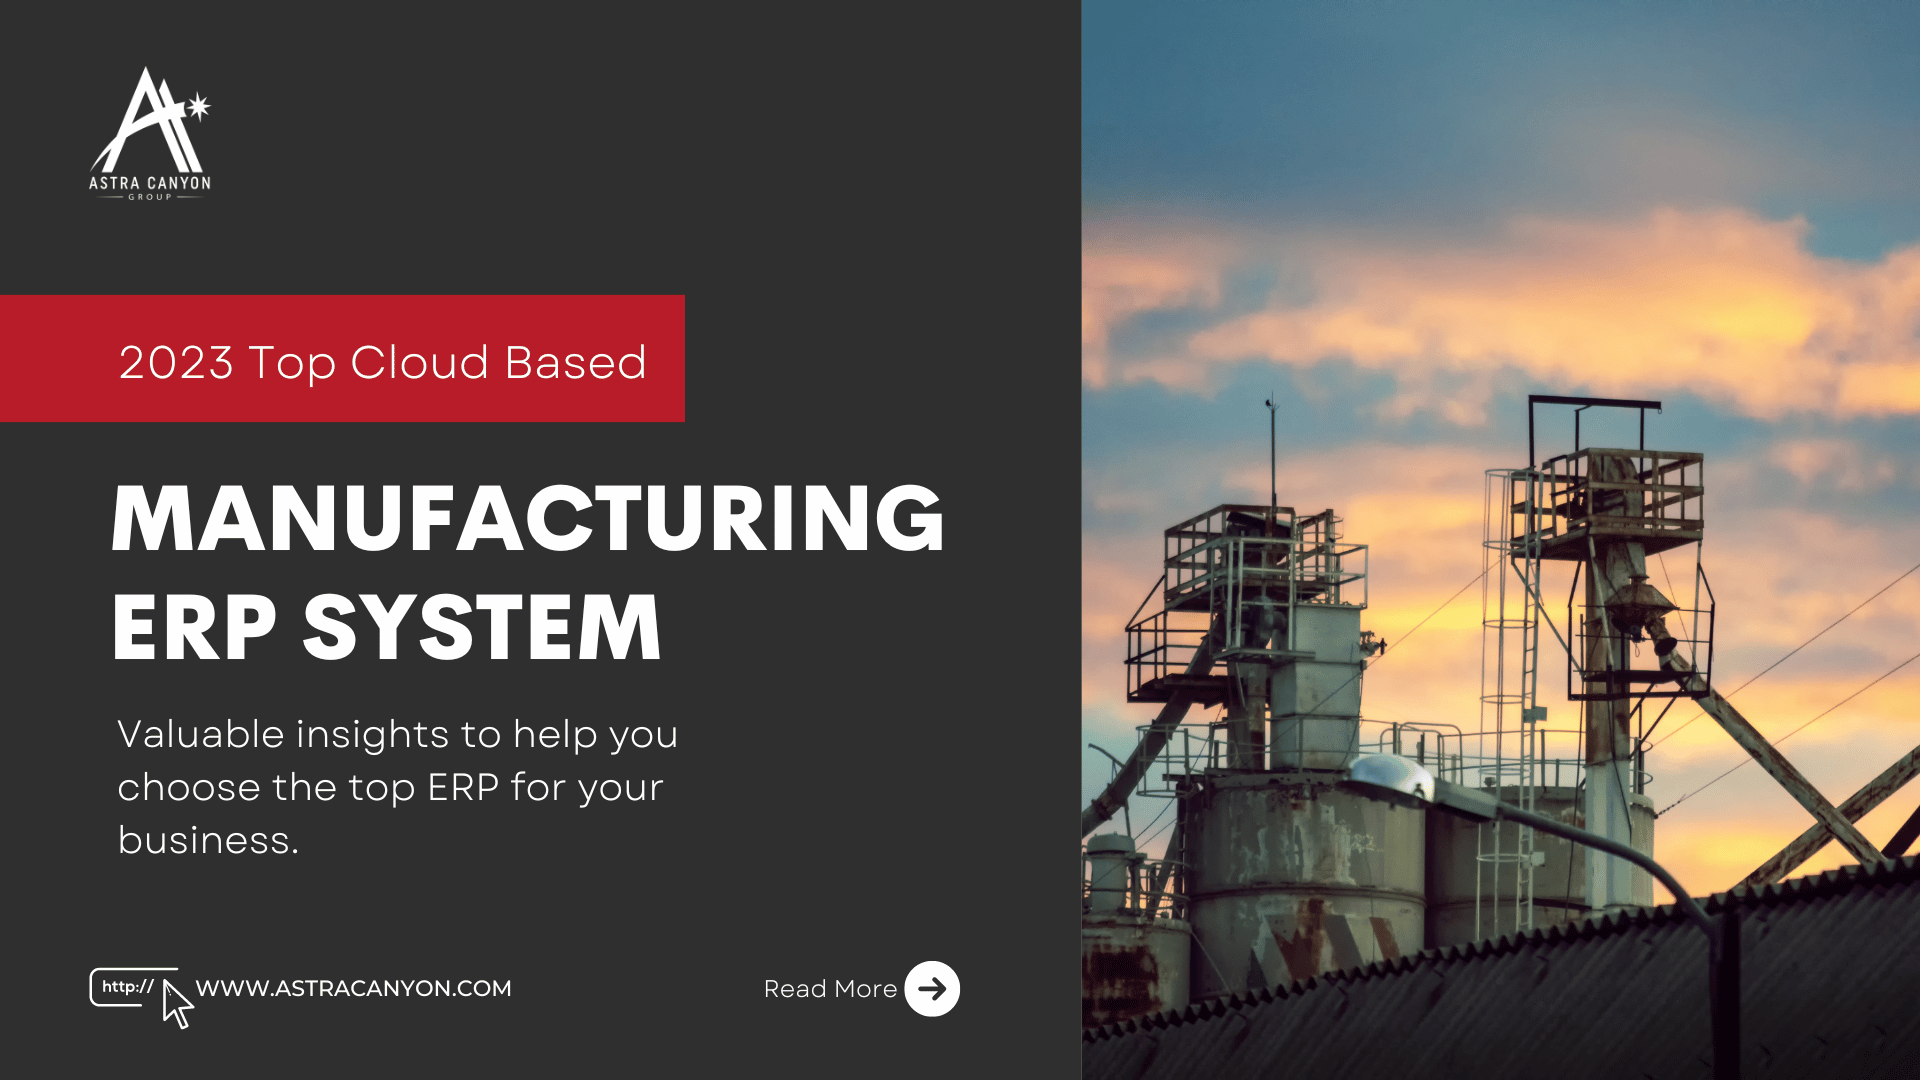 TOP ERP System for manufacturing, cloud based ERP